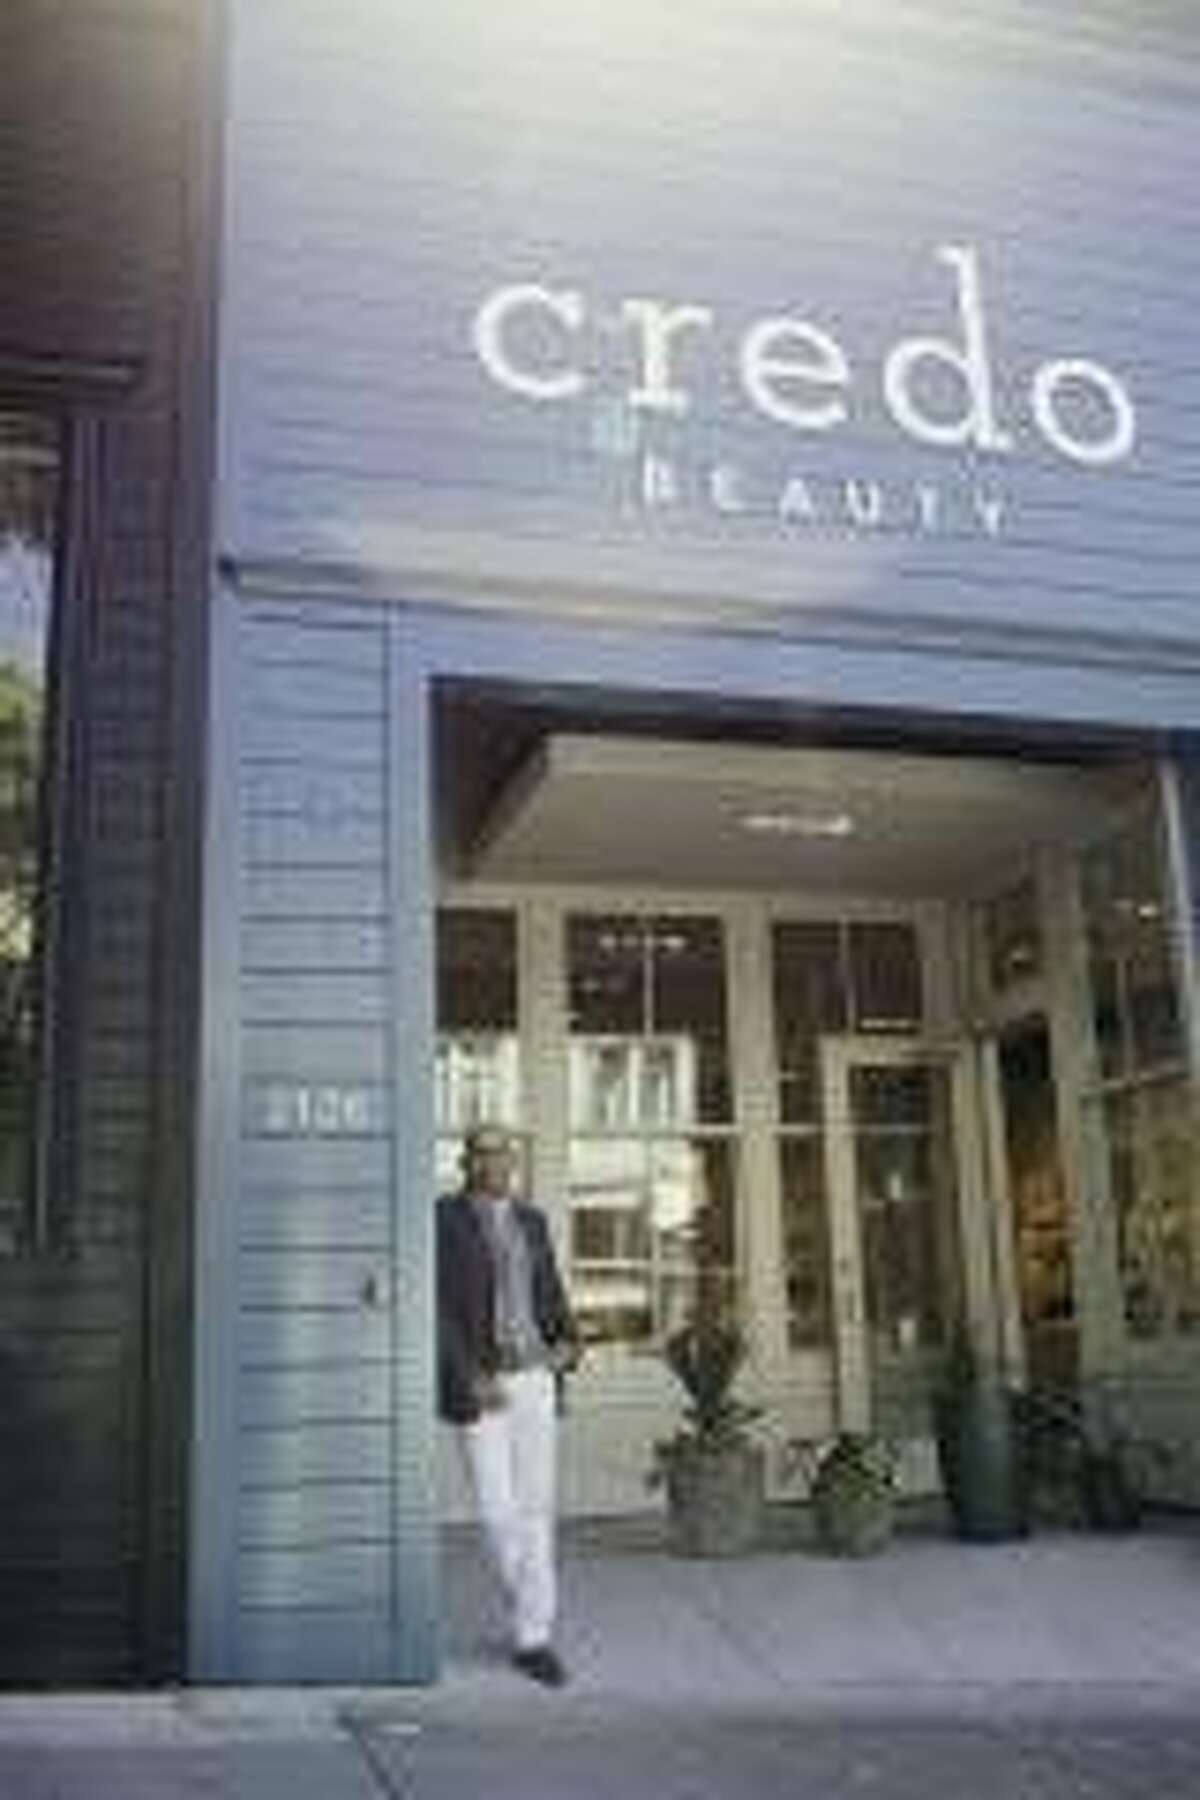 Shashi Batra is the founder and CEO of Credo, a natural beauty store which recently opened on Fillmore in Pacific Heights.